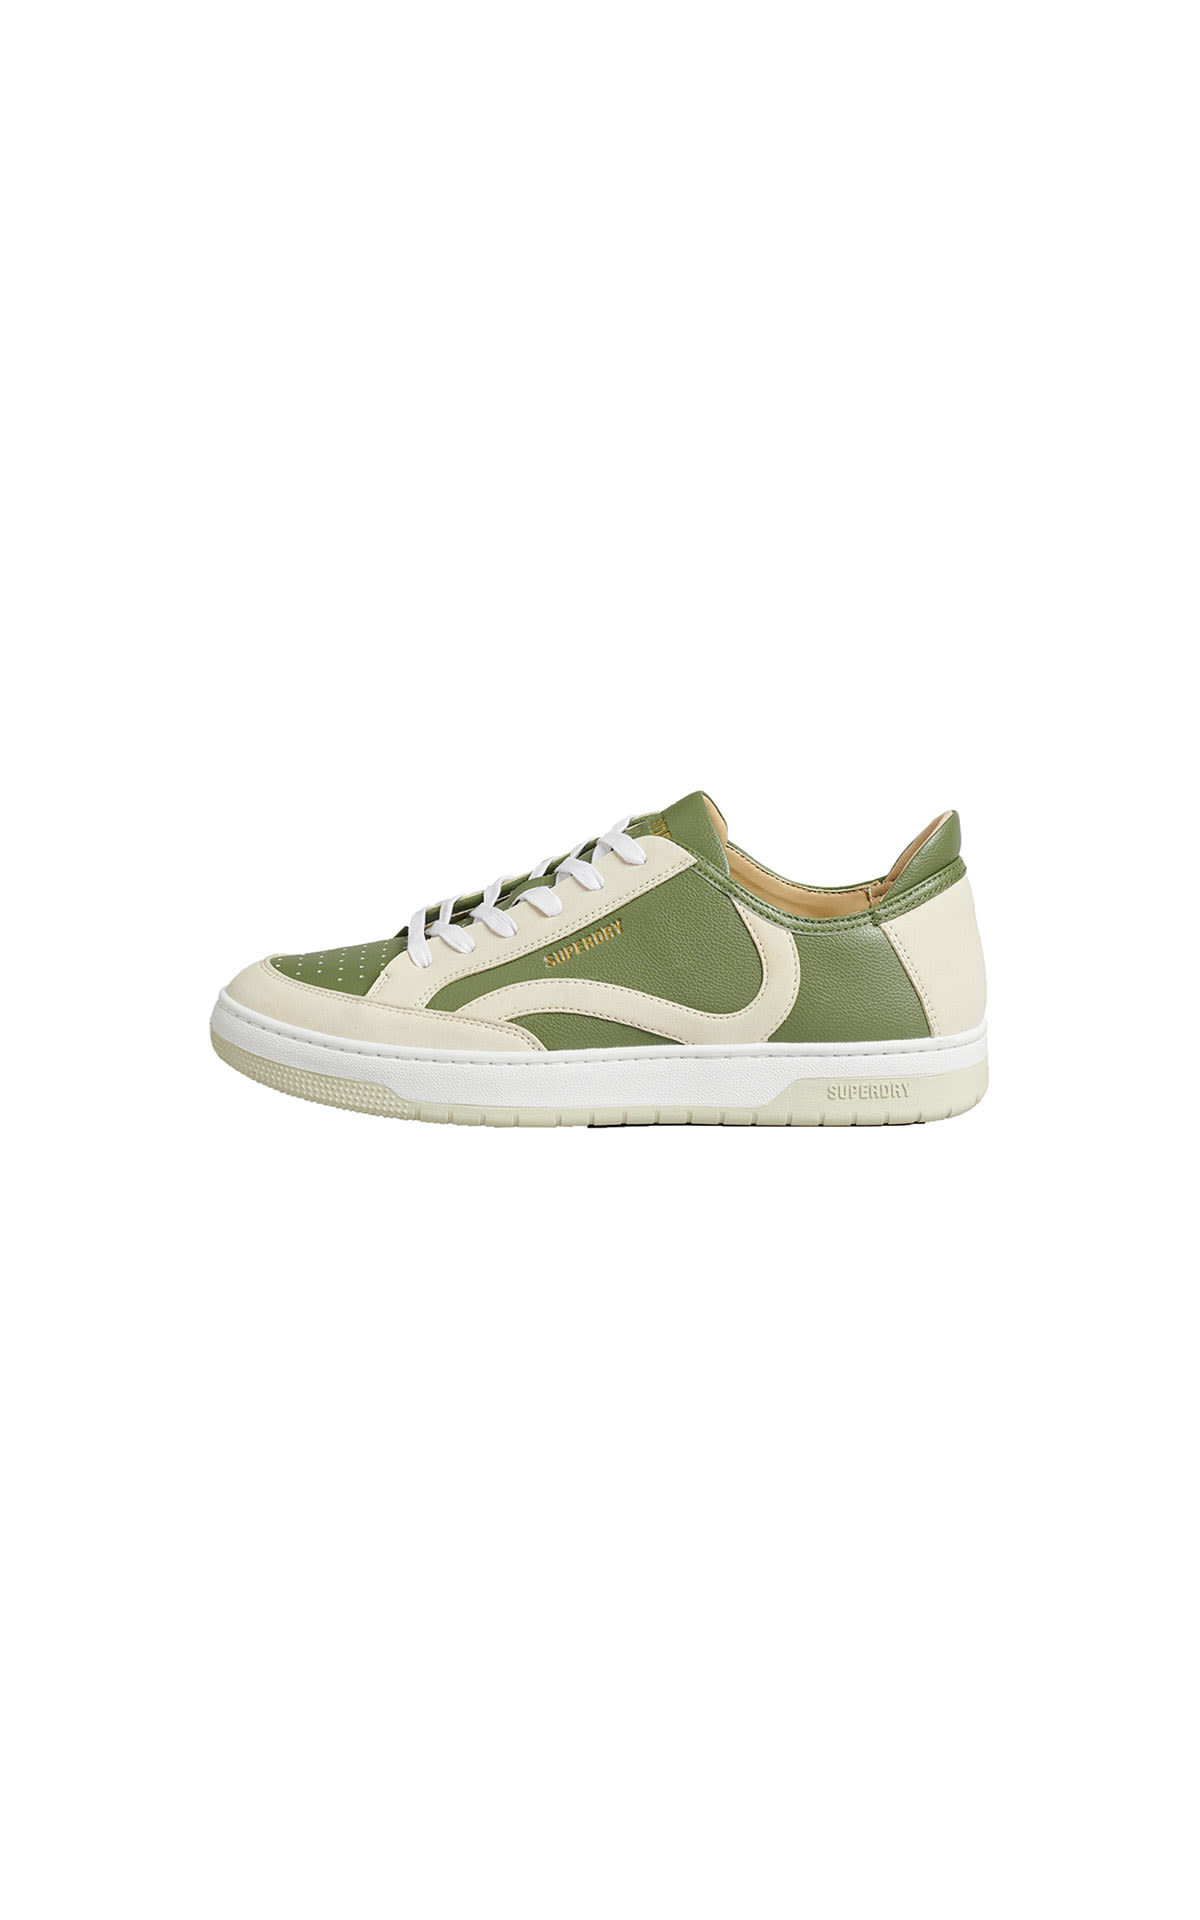 Superdry Olive khaki and oatmeal trainers mens from Bicester Village